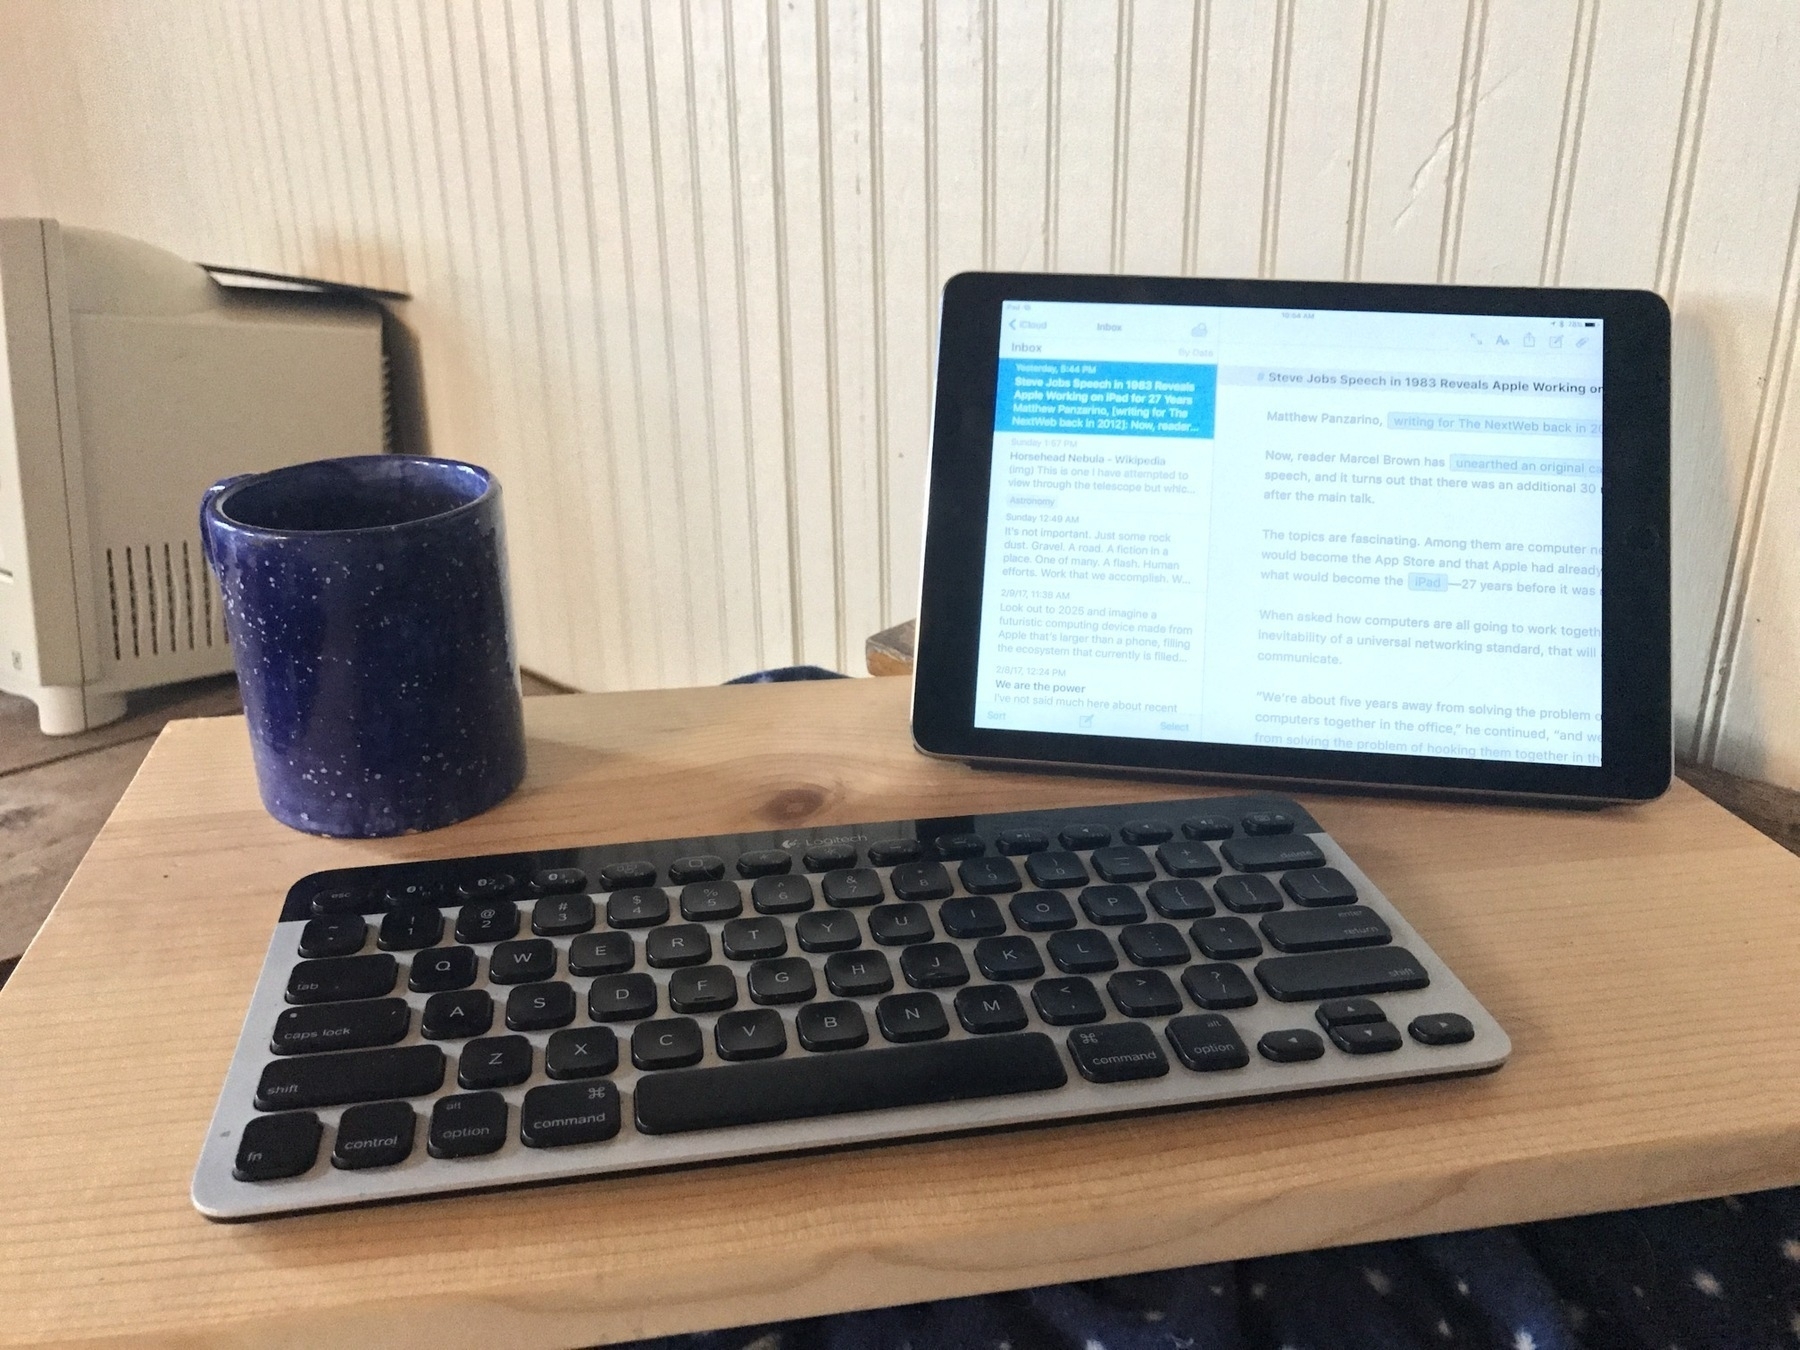 A plank of wood serves as an improvised lap desk. An iPad sits to the right, a blue coffee mug to the left and a keyboard in front.